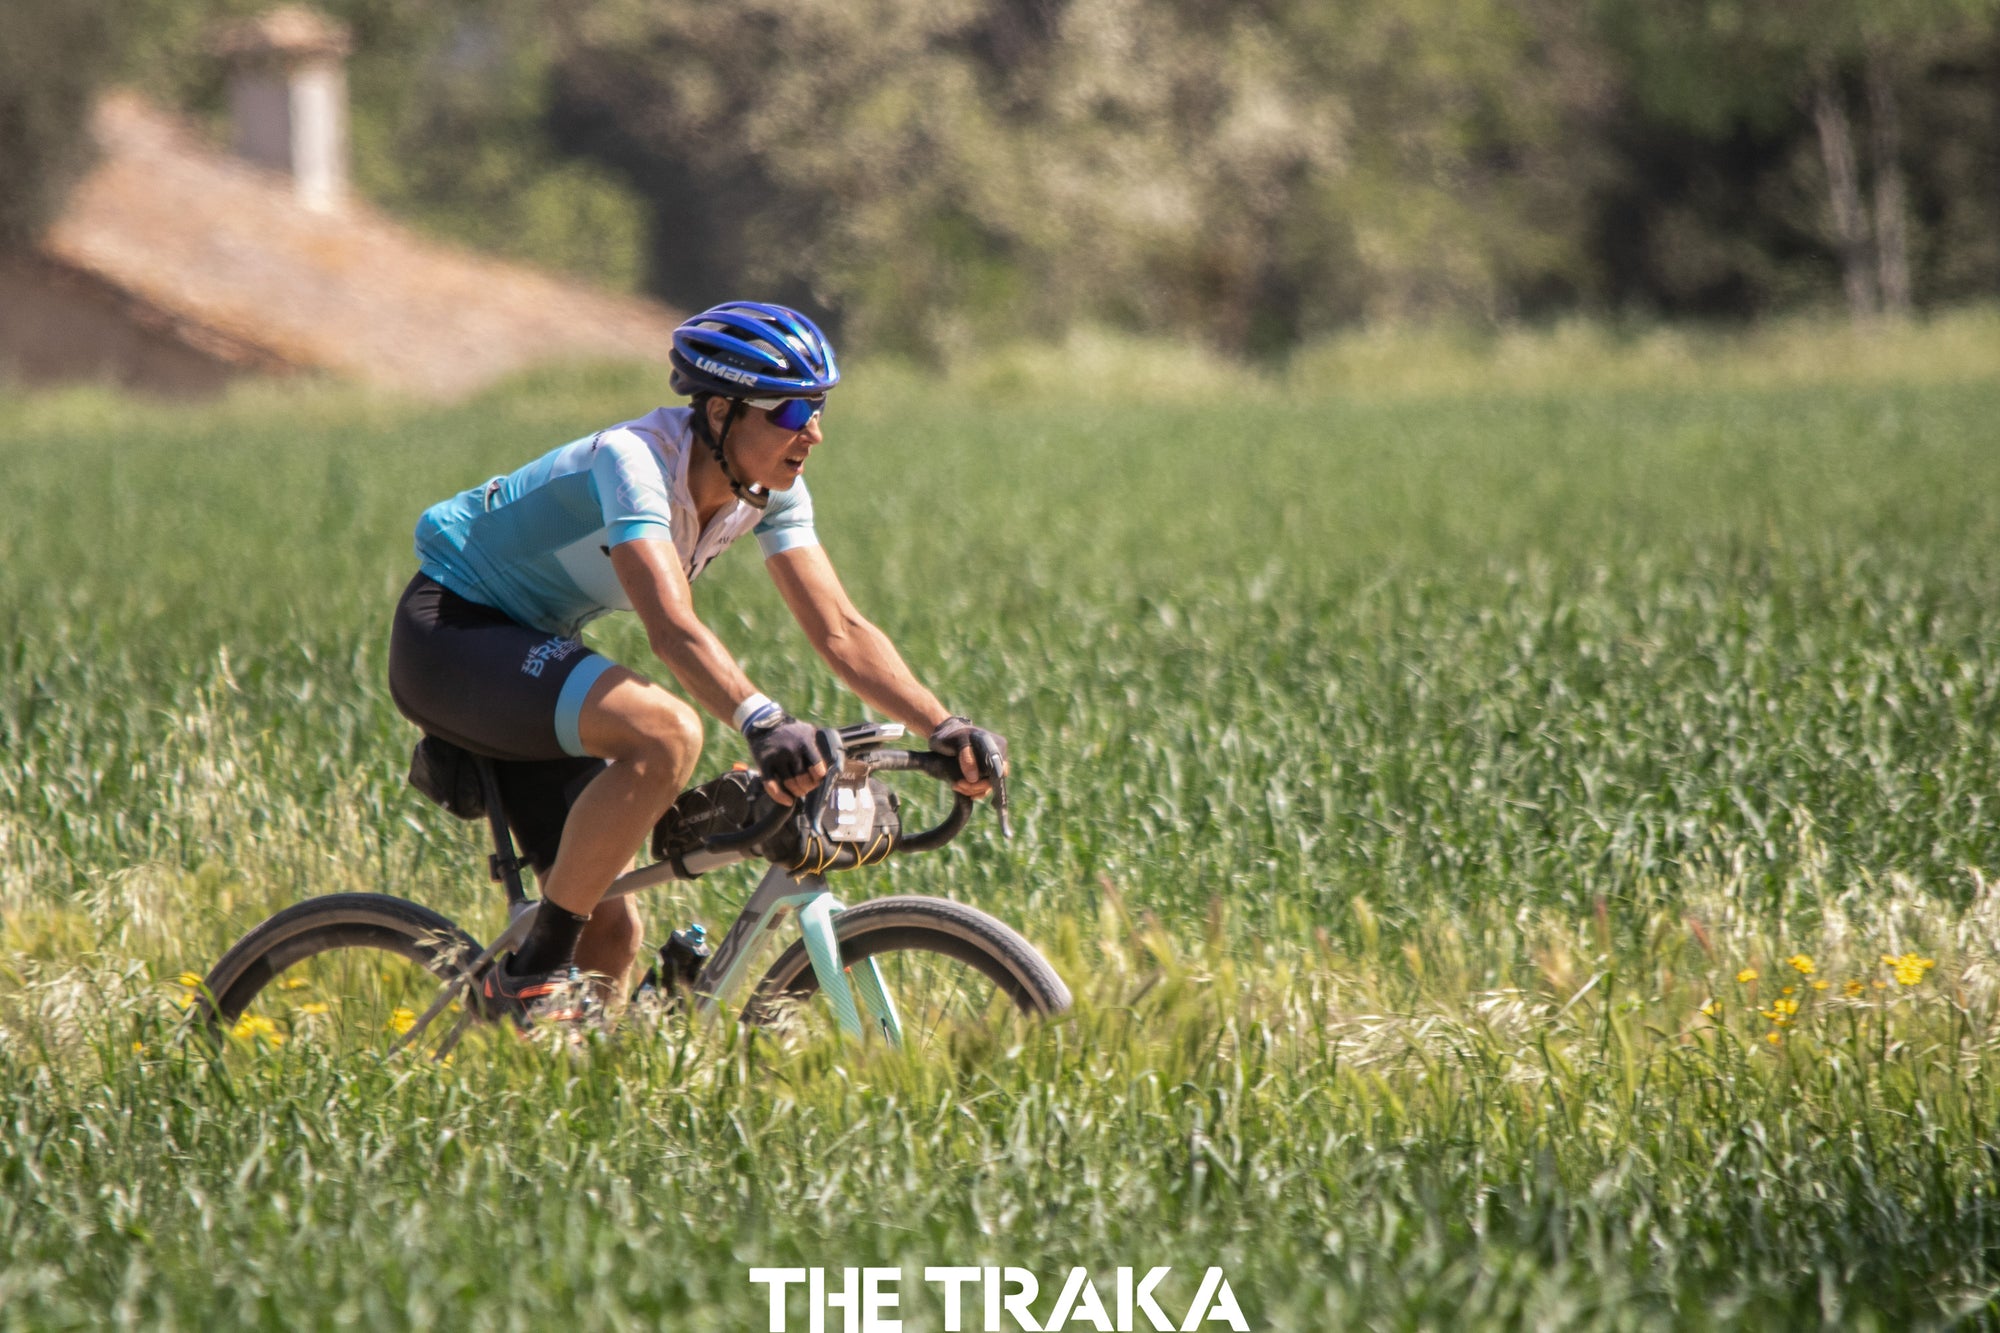 Traka 200 race report - contributed by Caroline Livesey